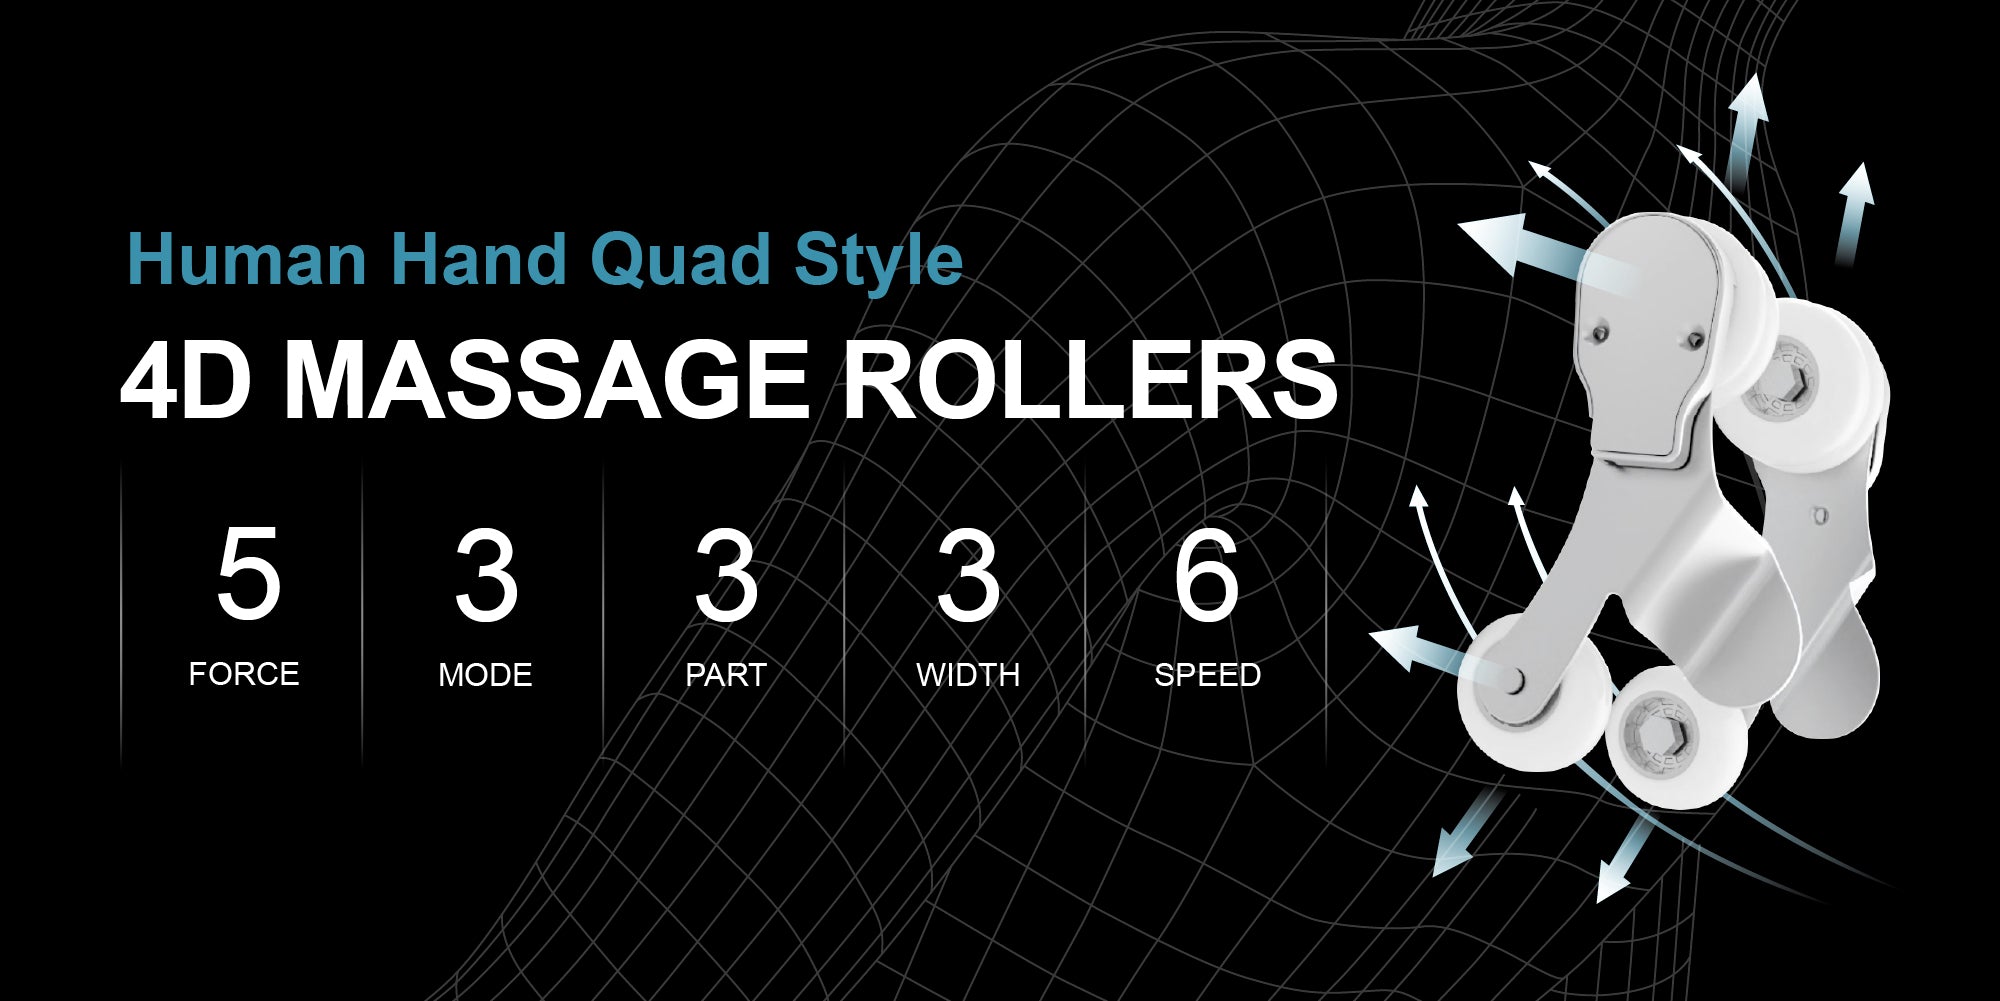 Human Hand Quad Style - 4D Massage Rollers